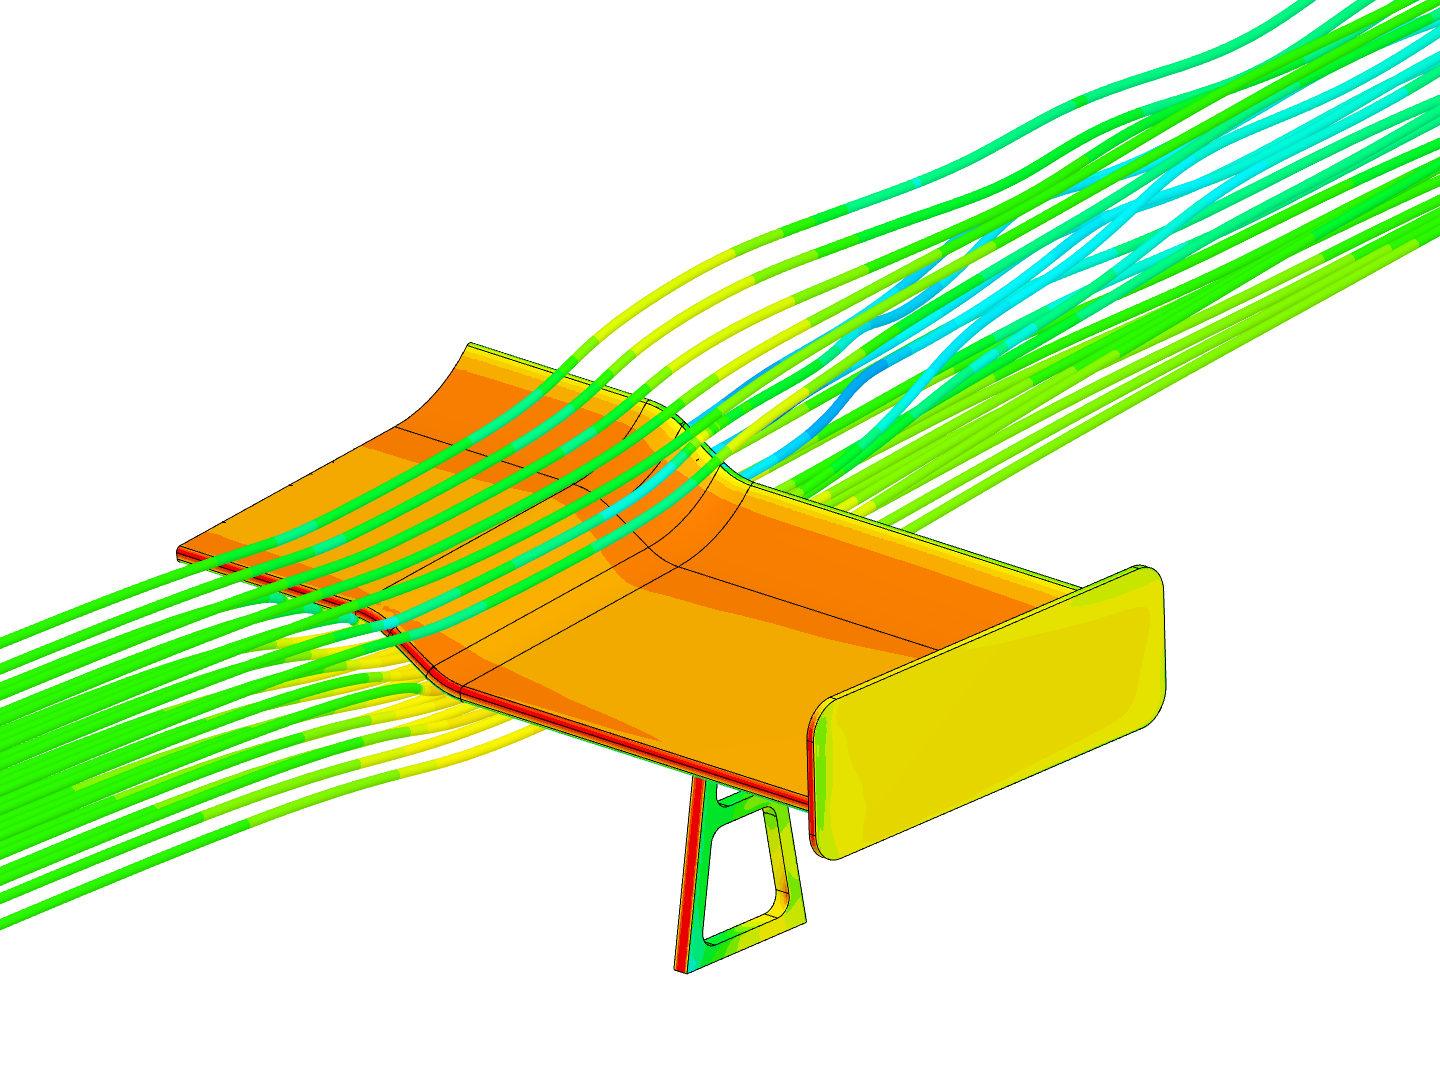 Coursera - Airflow Around a GT Car Spoiler - Learn image